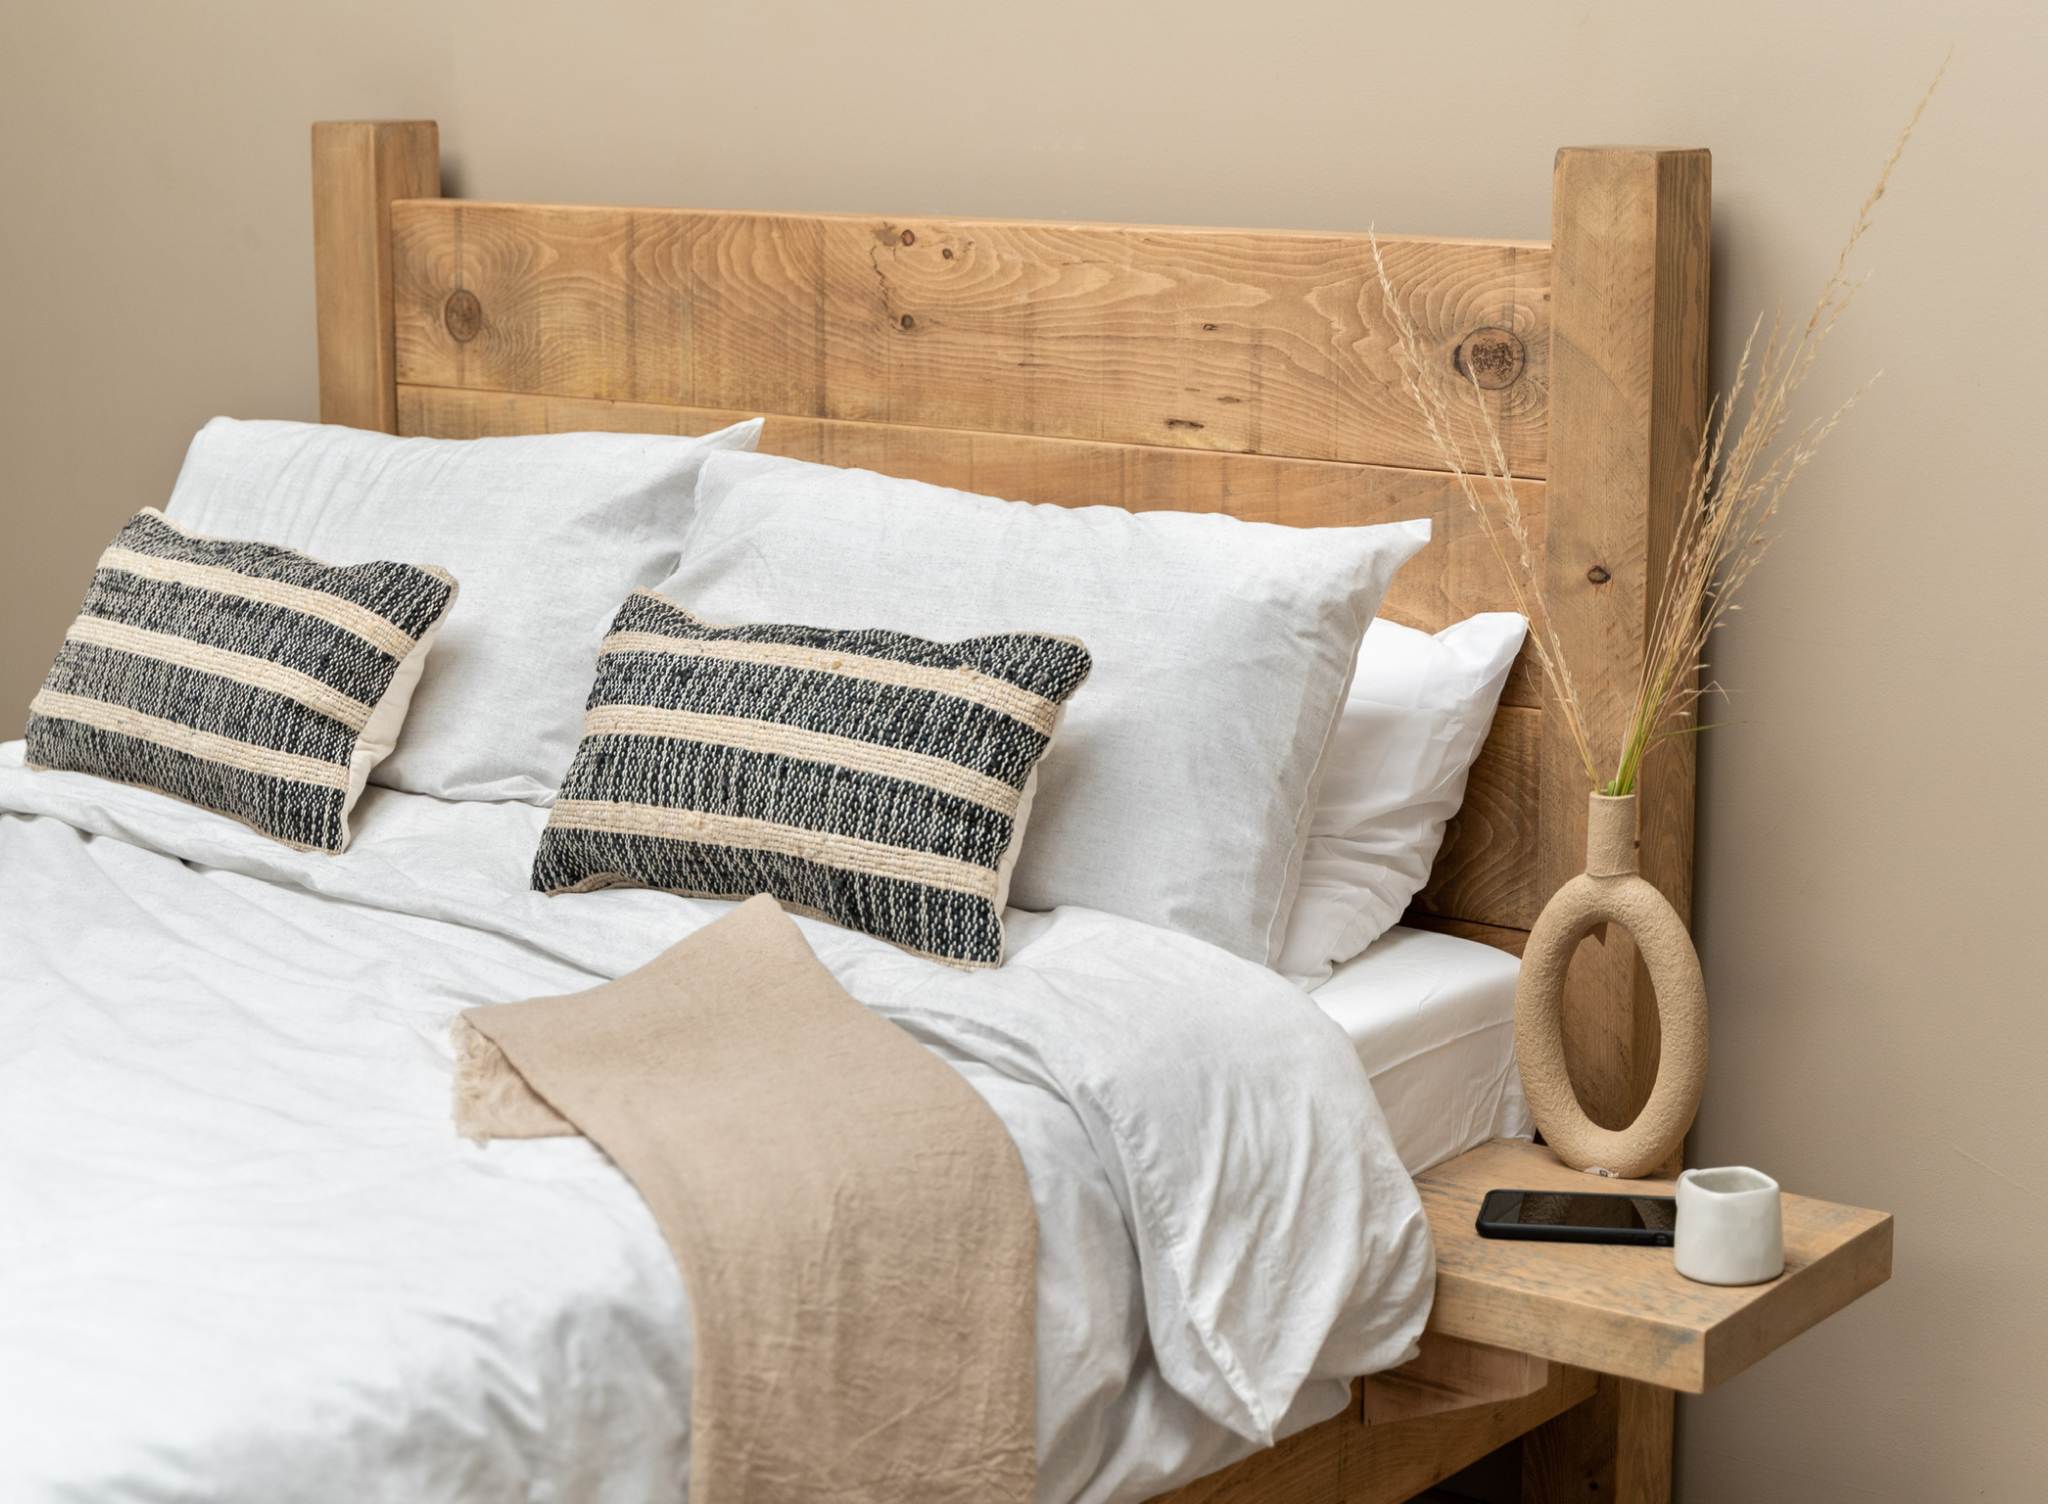 Solid Wooden Beds From Willen Rose